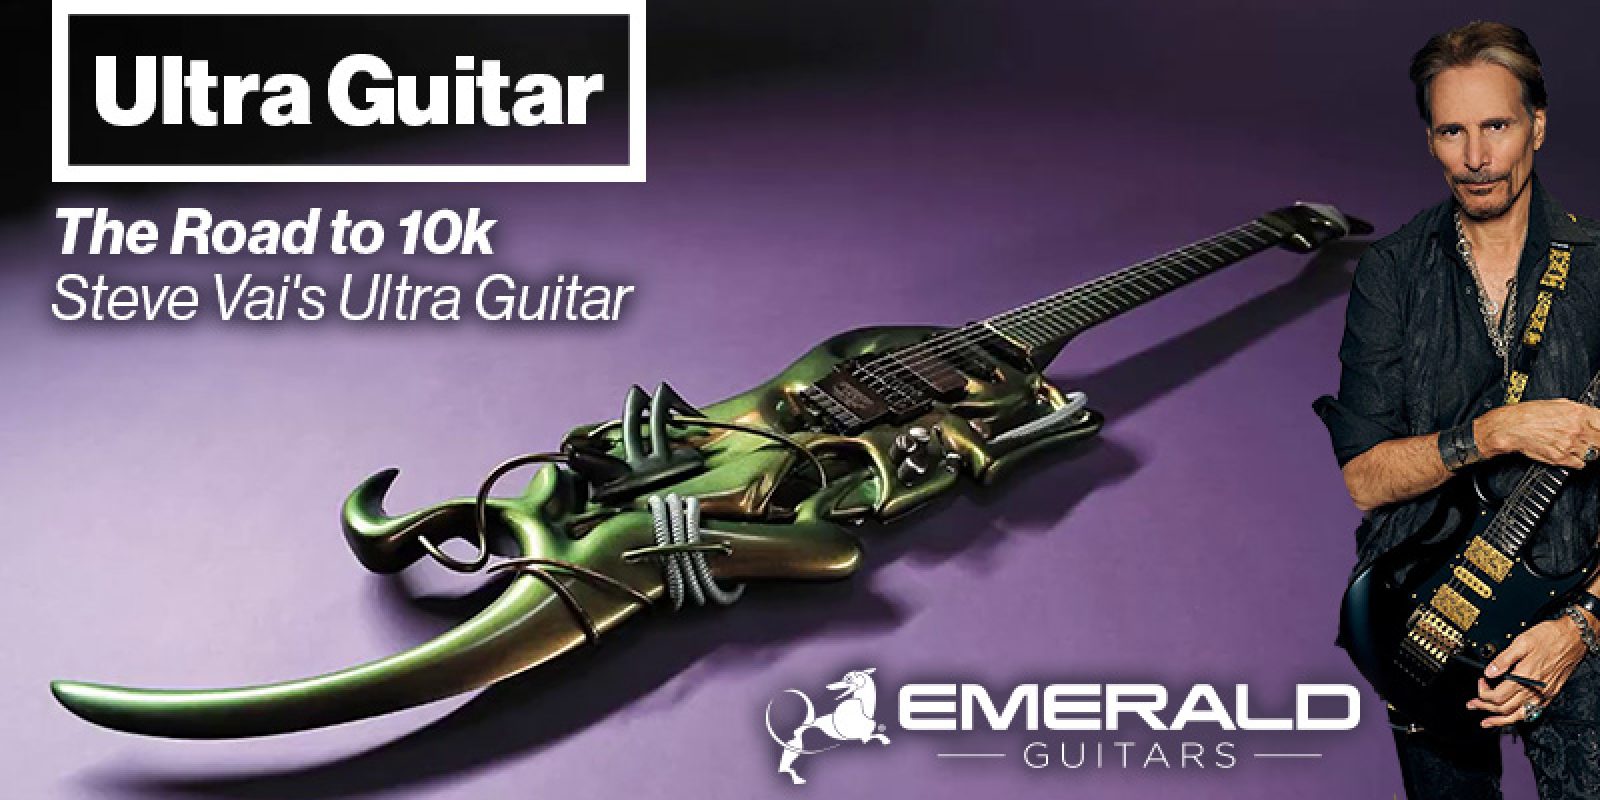 Steve Vai and the Ultra Guitar